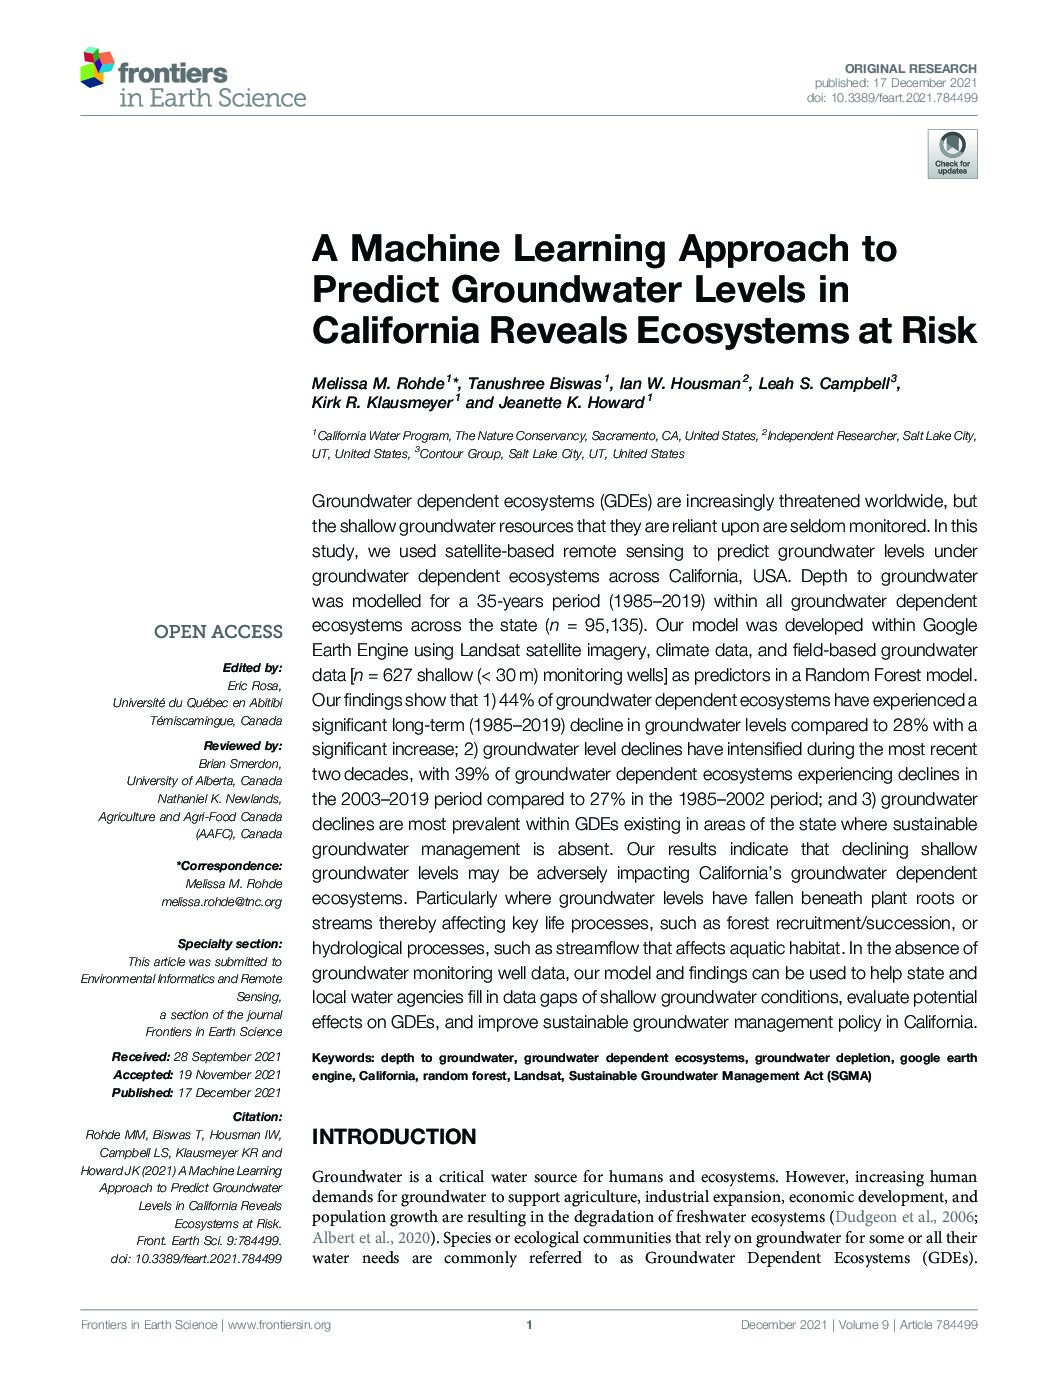 A Machine Learning Approach to Predict Groundwater Levels in California Reveals Ecosystems at Risk